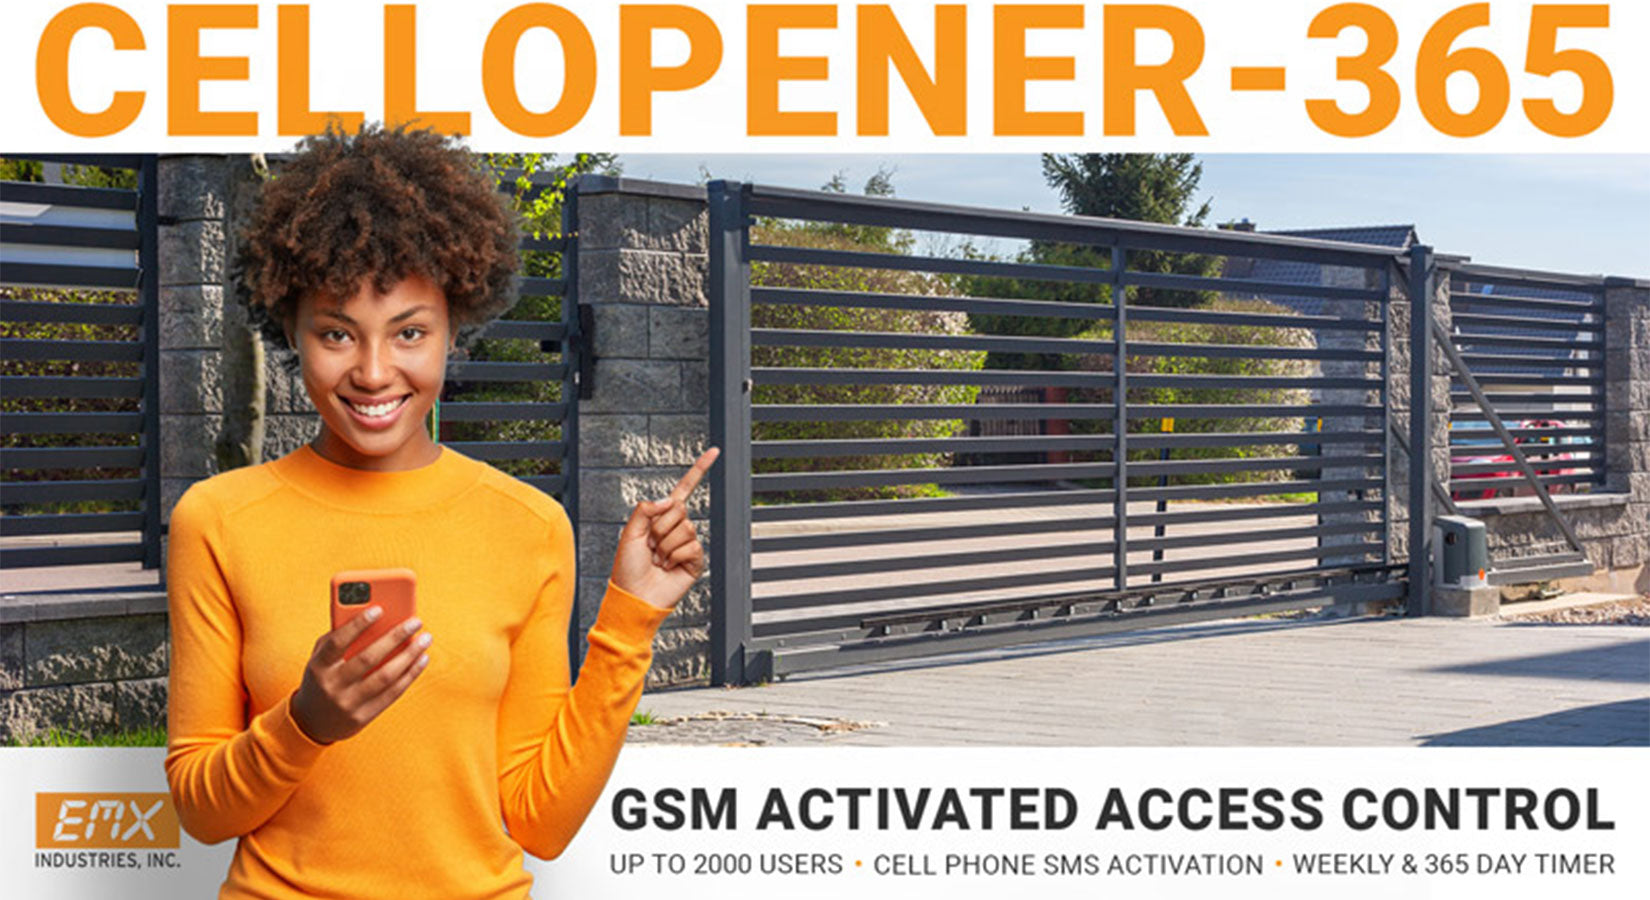 Introducing EMX CELLOPENER-365 – The Ultimate Large-Scale Access Control System | All Security Equipment